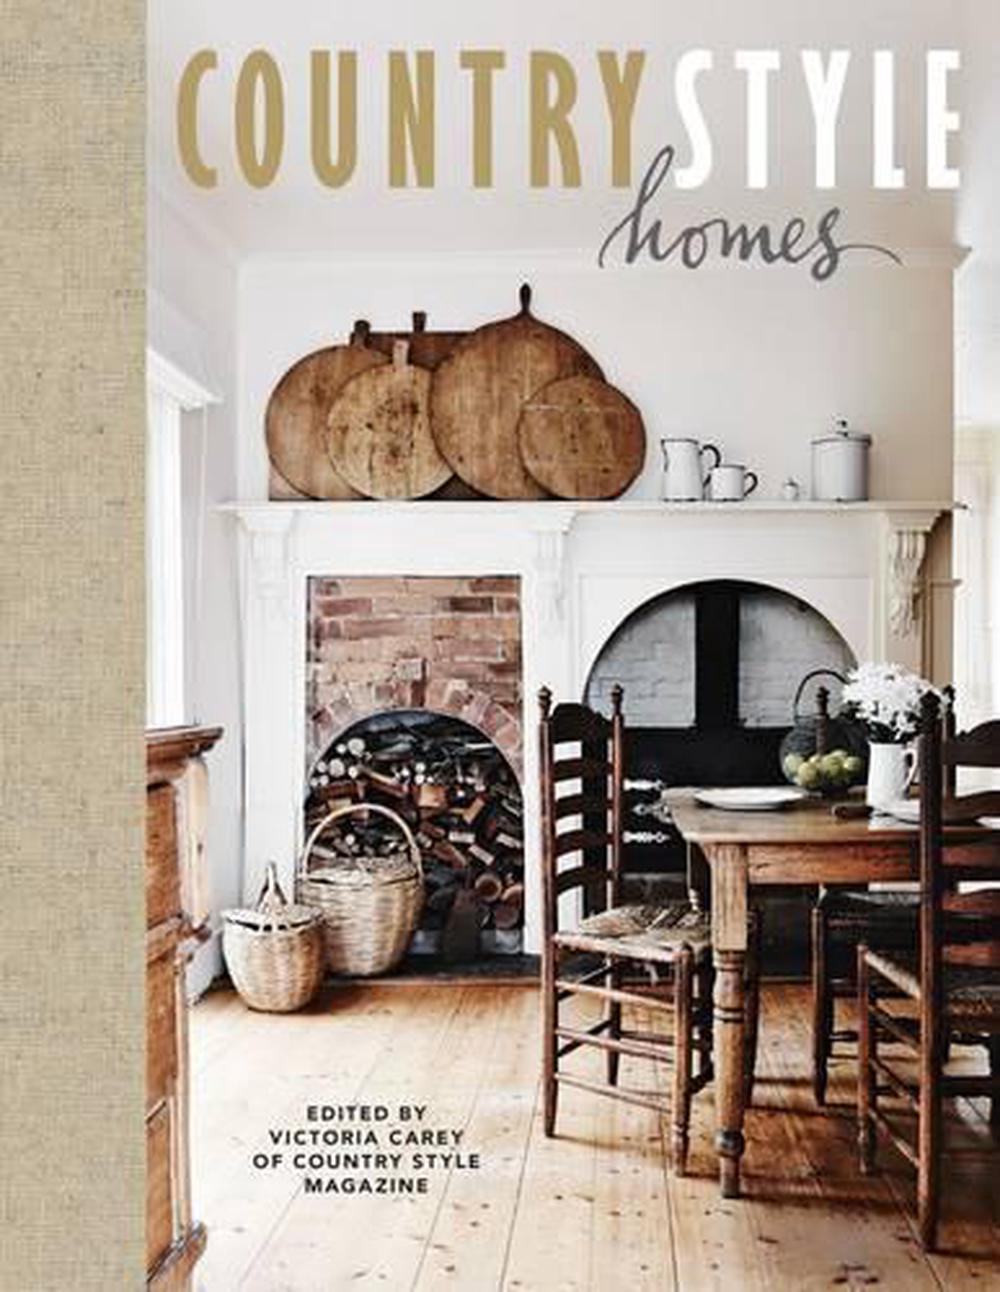 homes book review